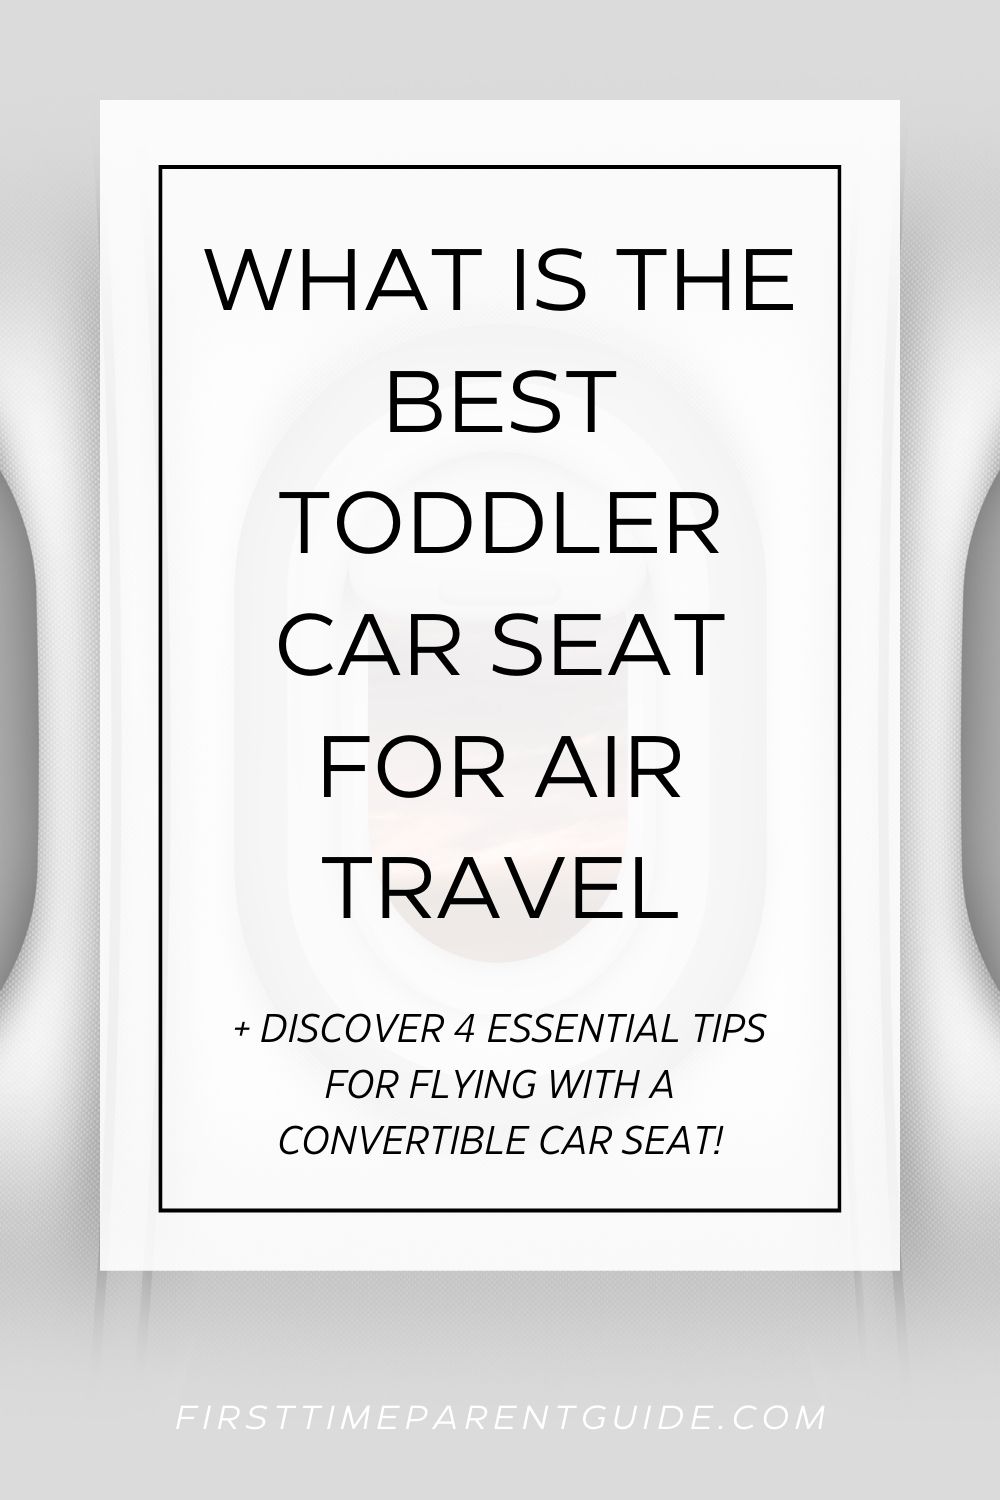 Best Toddler Car Seat for Air Travel